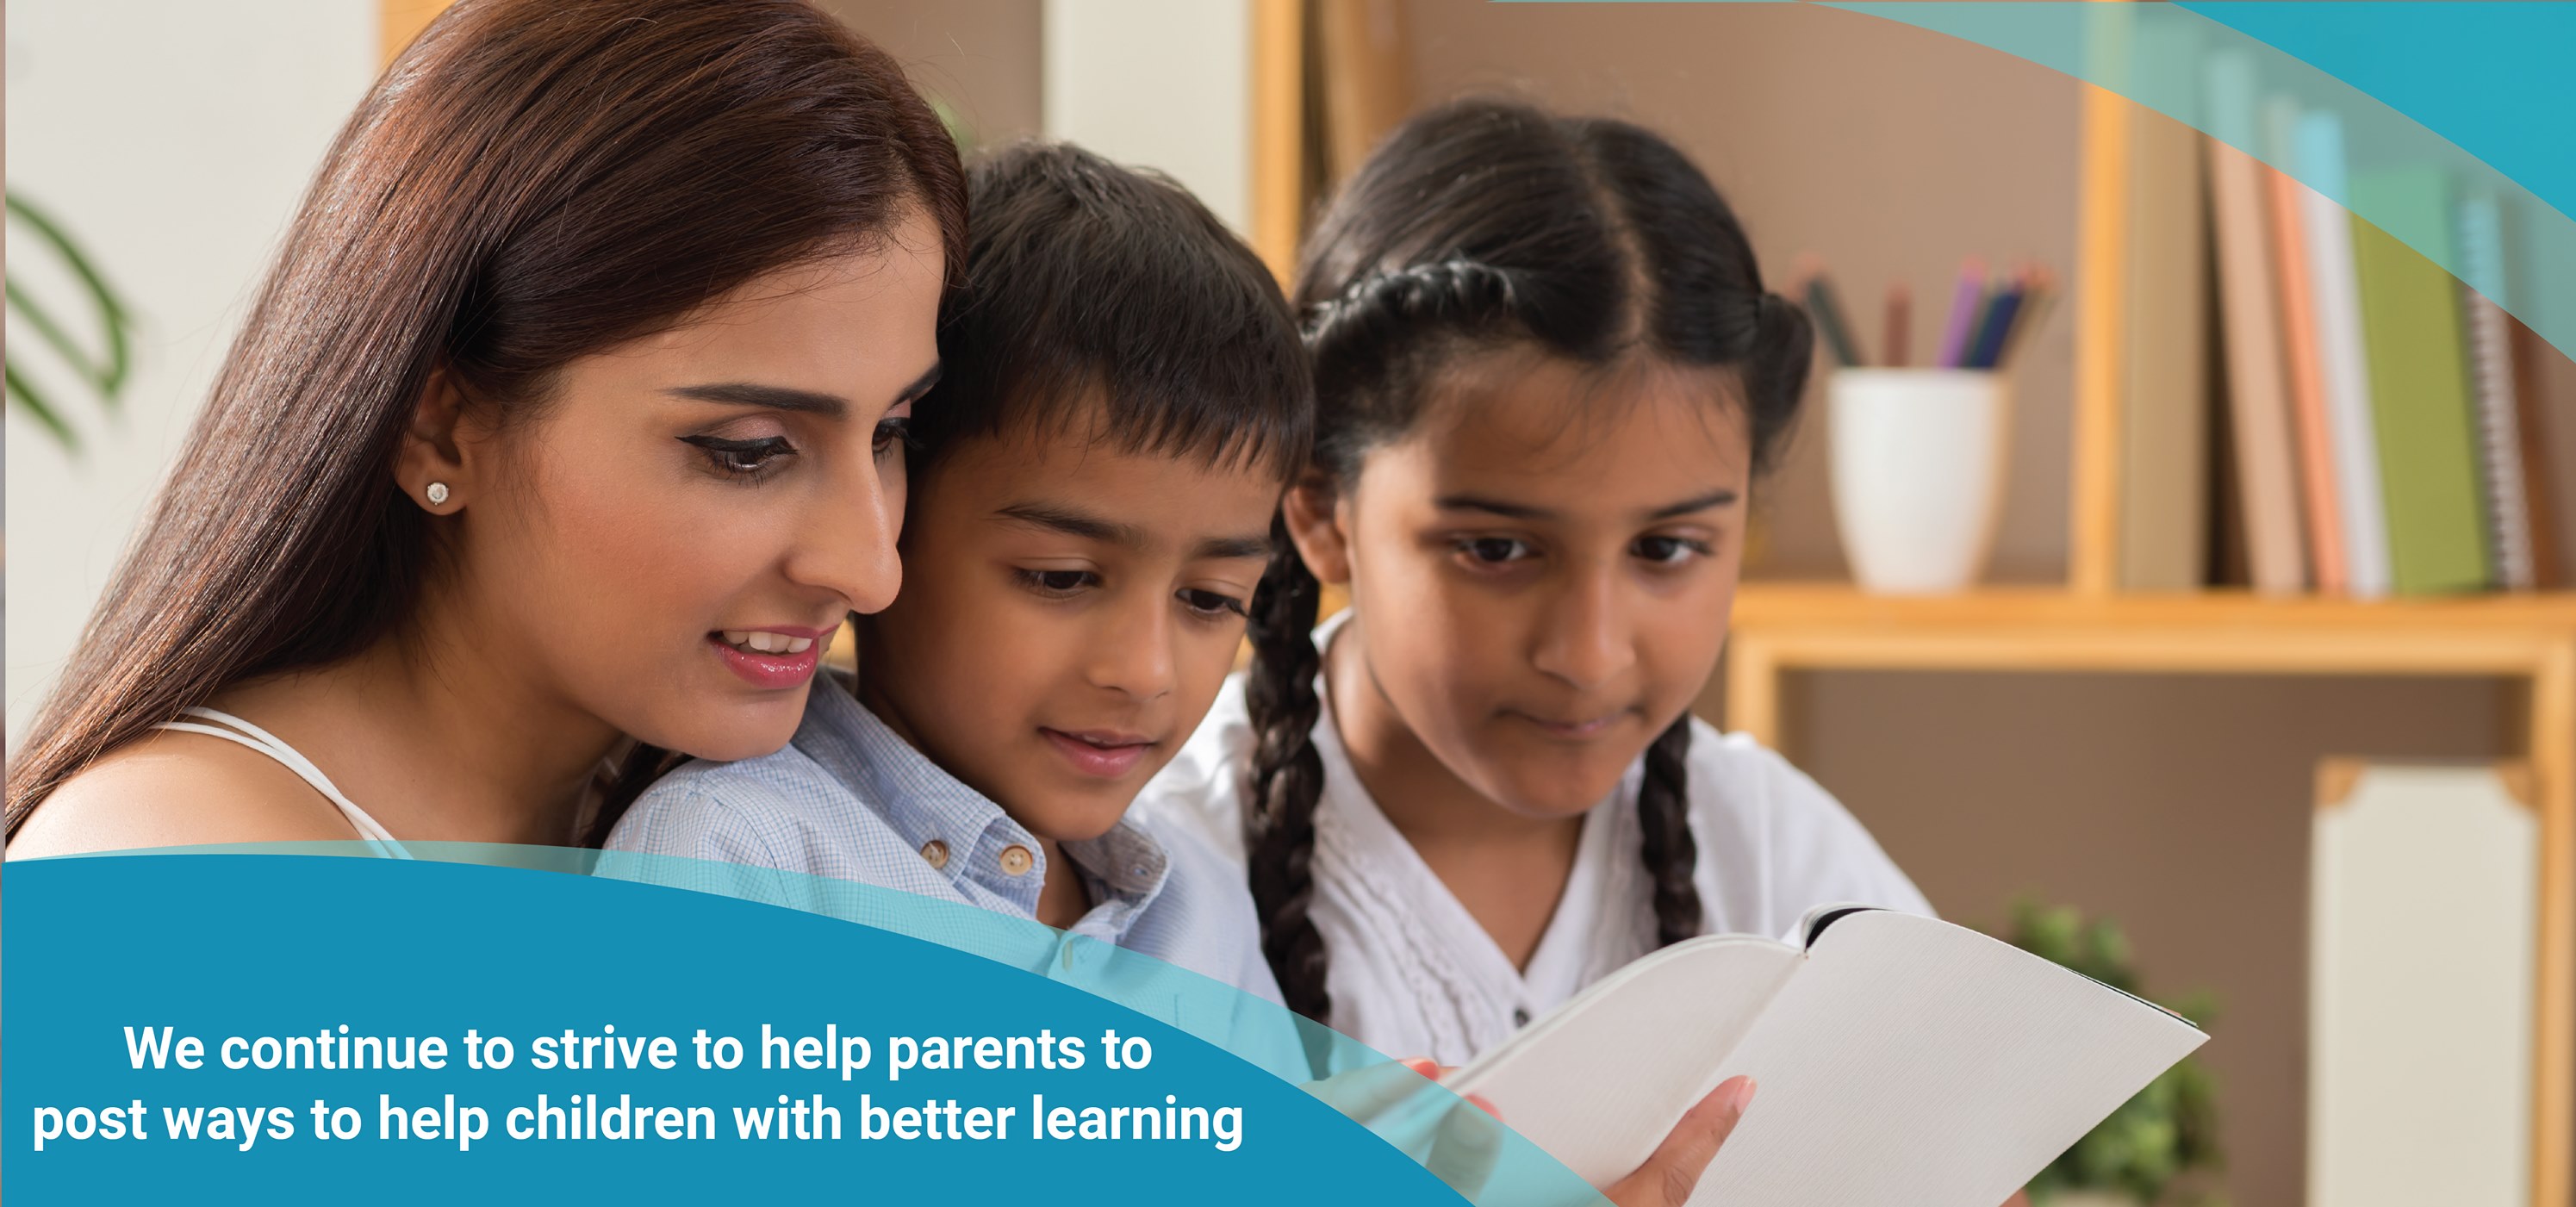 Help parents to post ways to help children with better learning. 